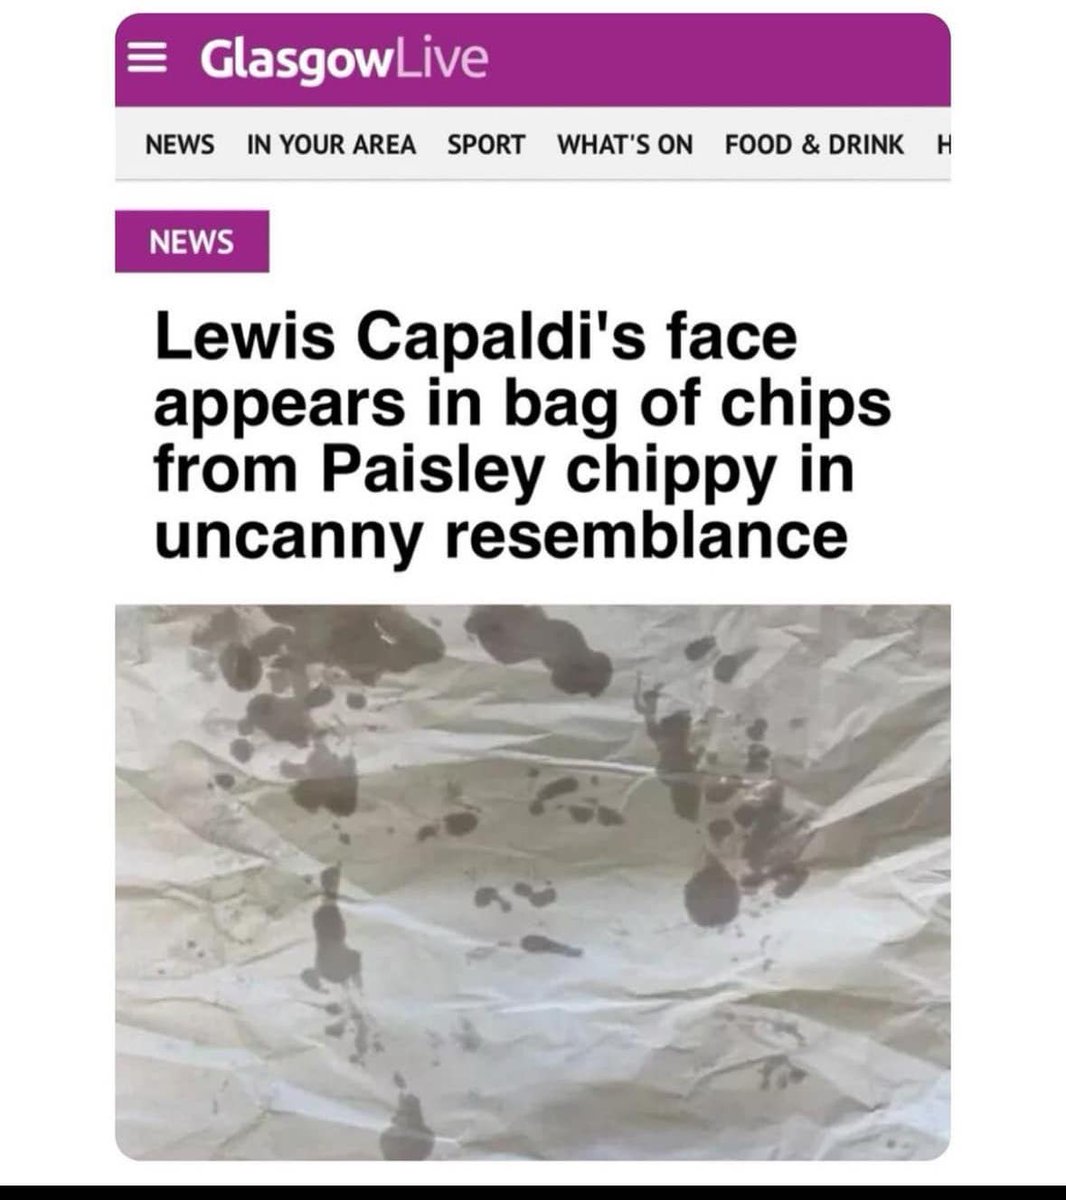 Tbf my face has appeared in a bag of chips more times than I care to remember.